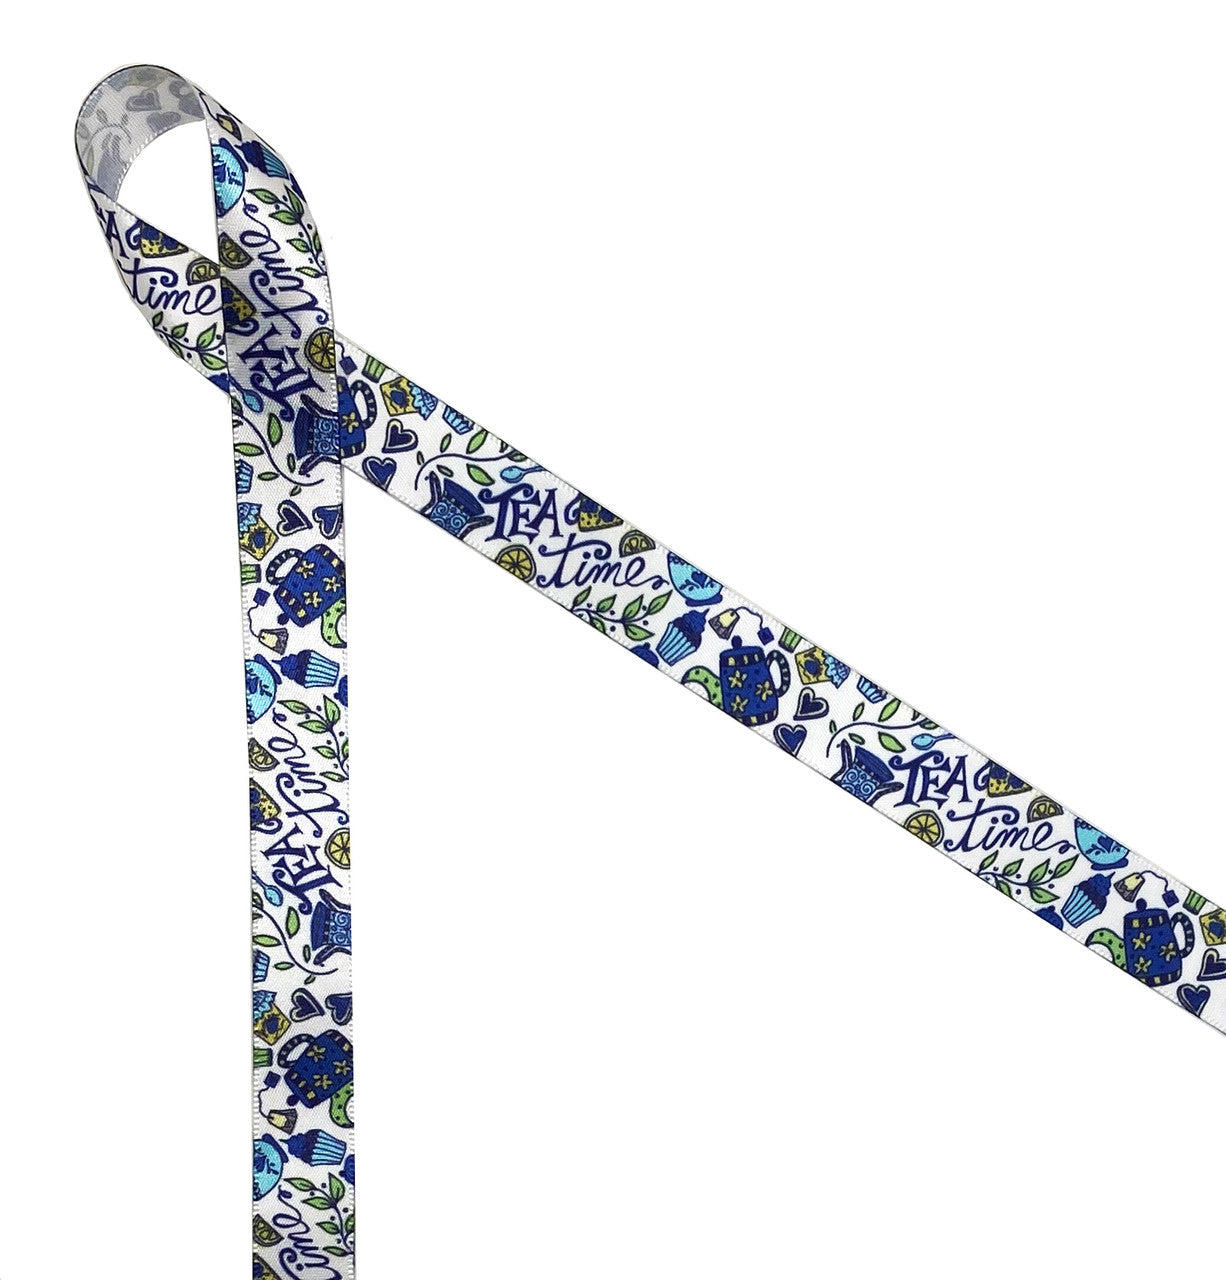 Tea time ribbon in shades of blue and yellow is a wonderful theme for Mother's Day or a bridal shower!